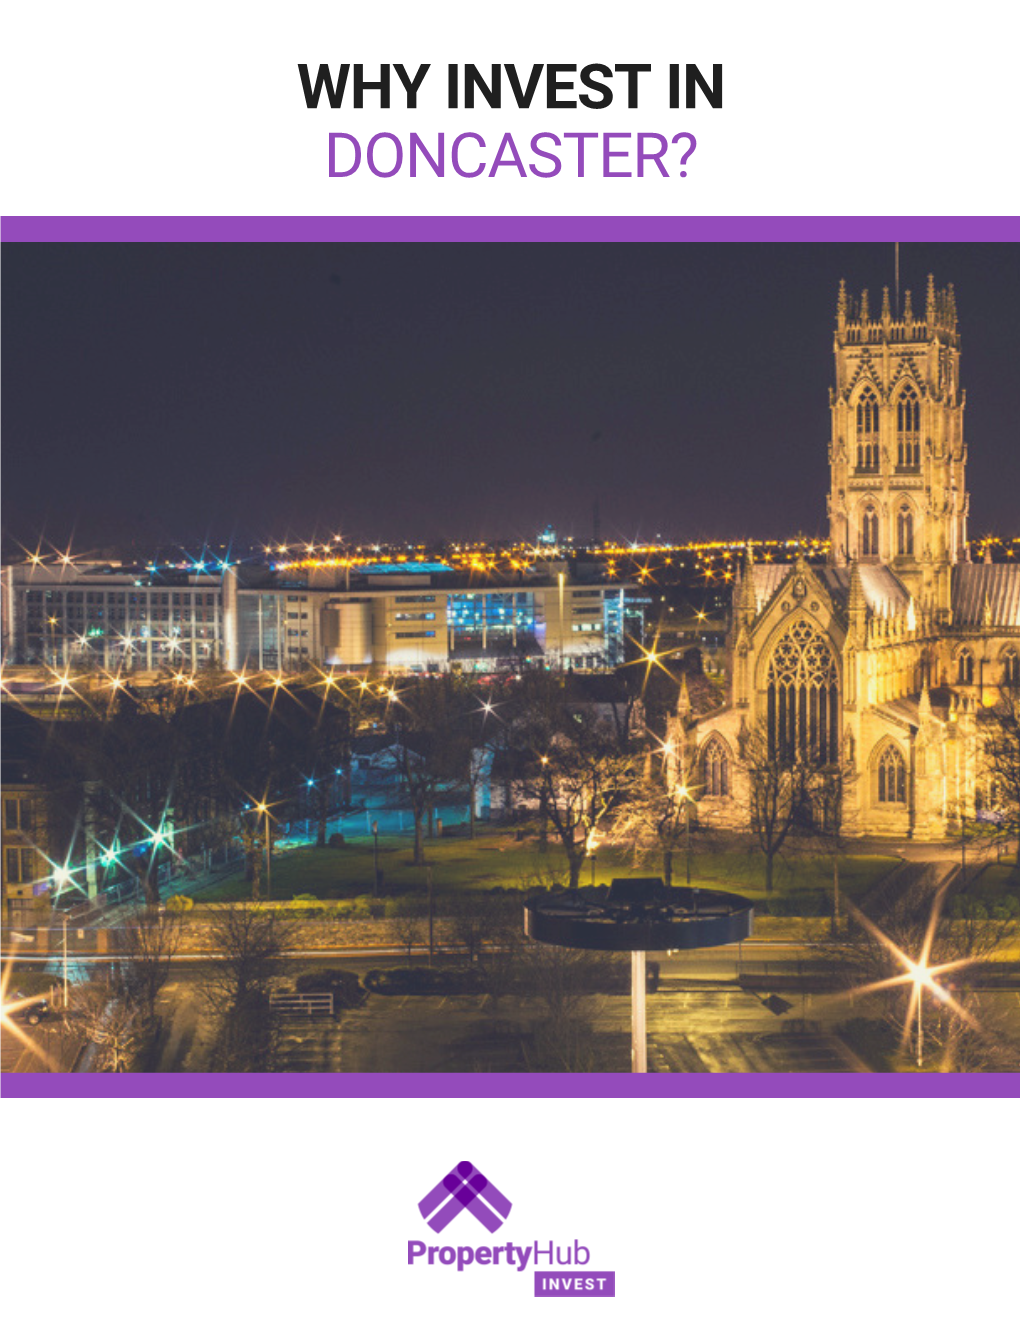 Doncaster Location Guide